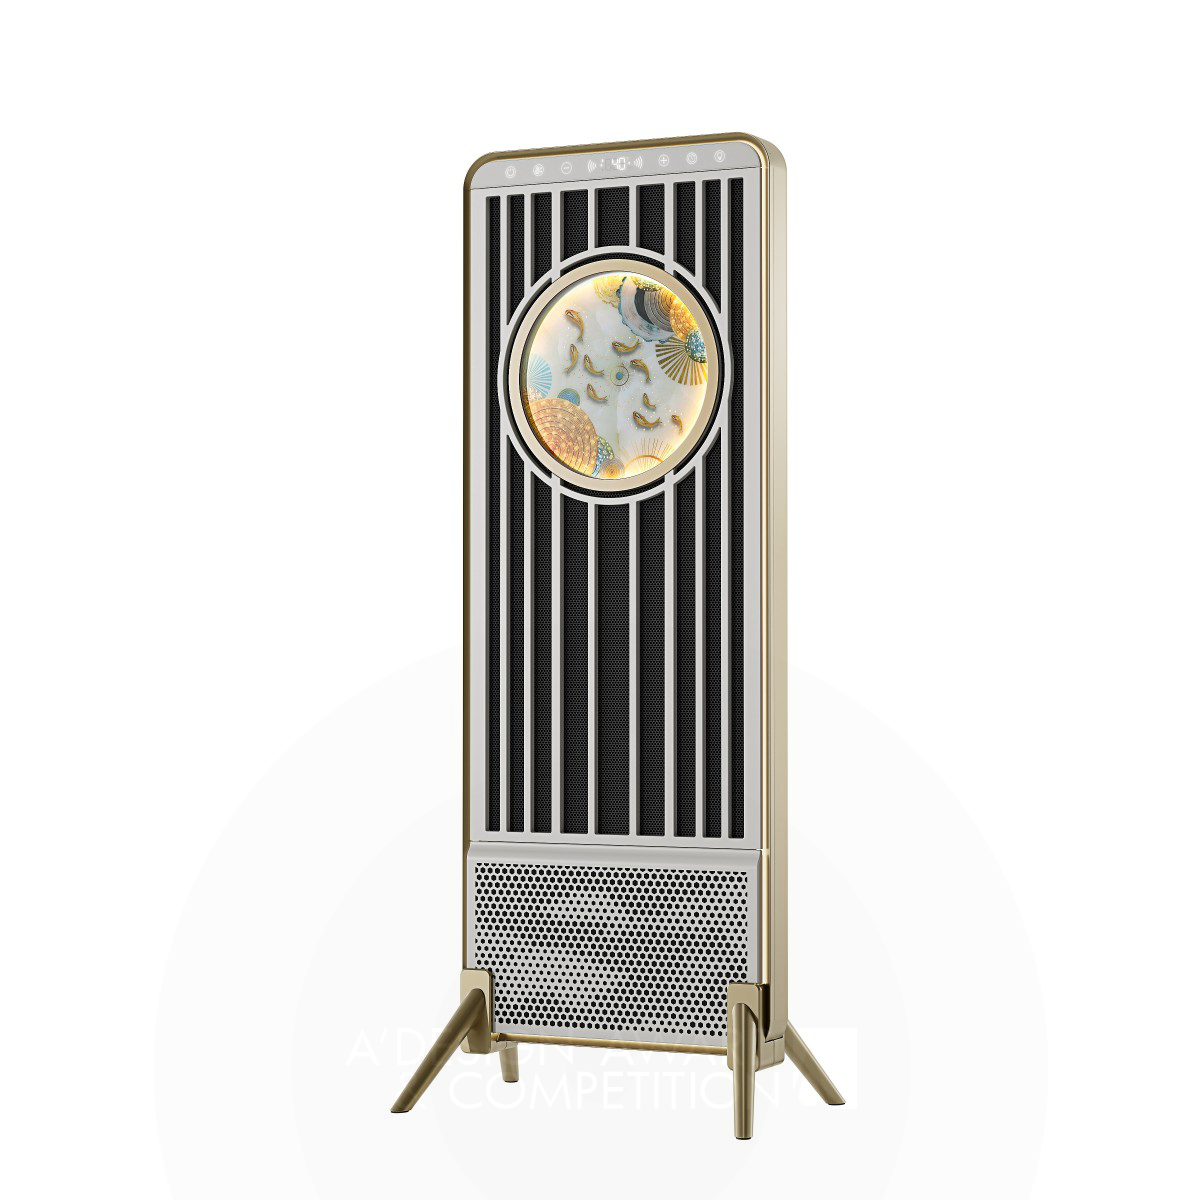 Jipin Industrial Design Co., Ltd wins Bronze at the prestigious A' Heating, Ventilation, and Air Conditioning Products Design Award with Hua Ping Electric Heater.